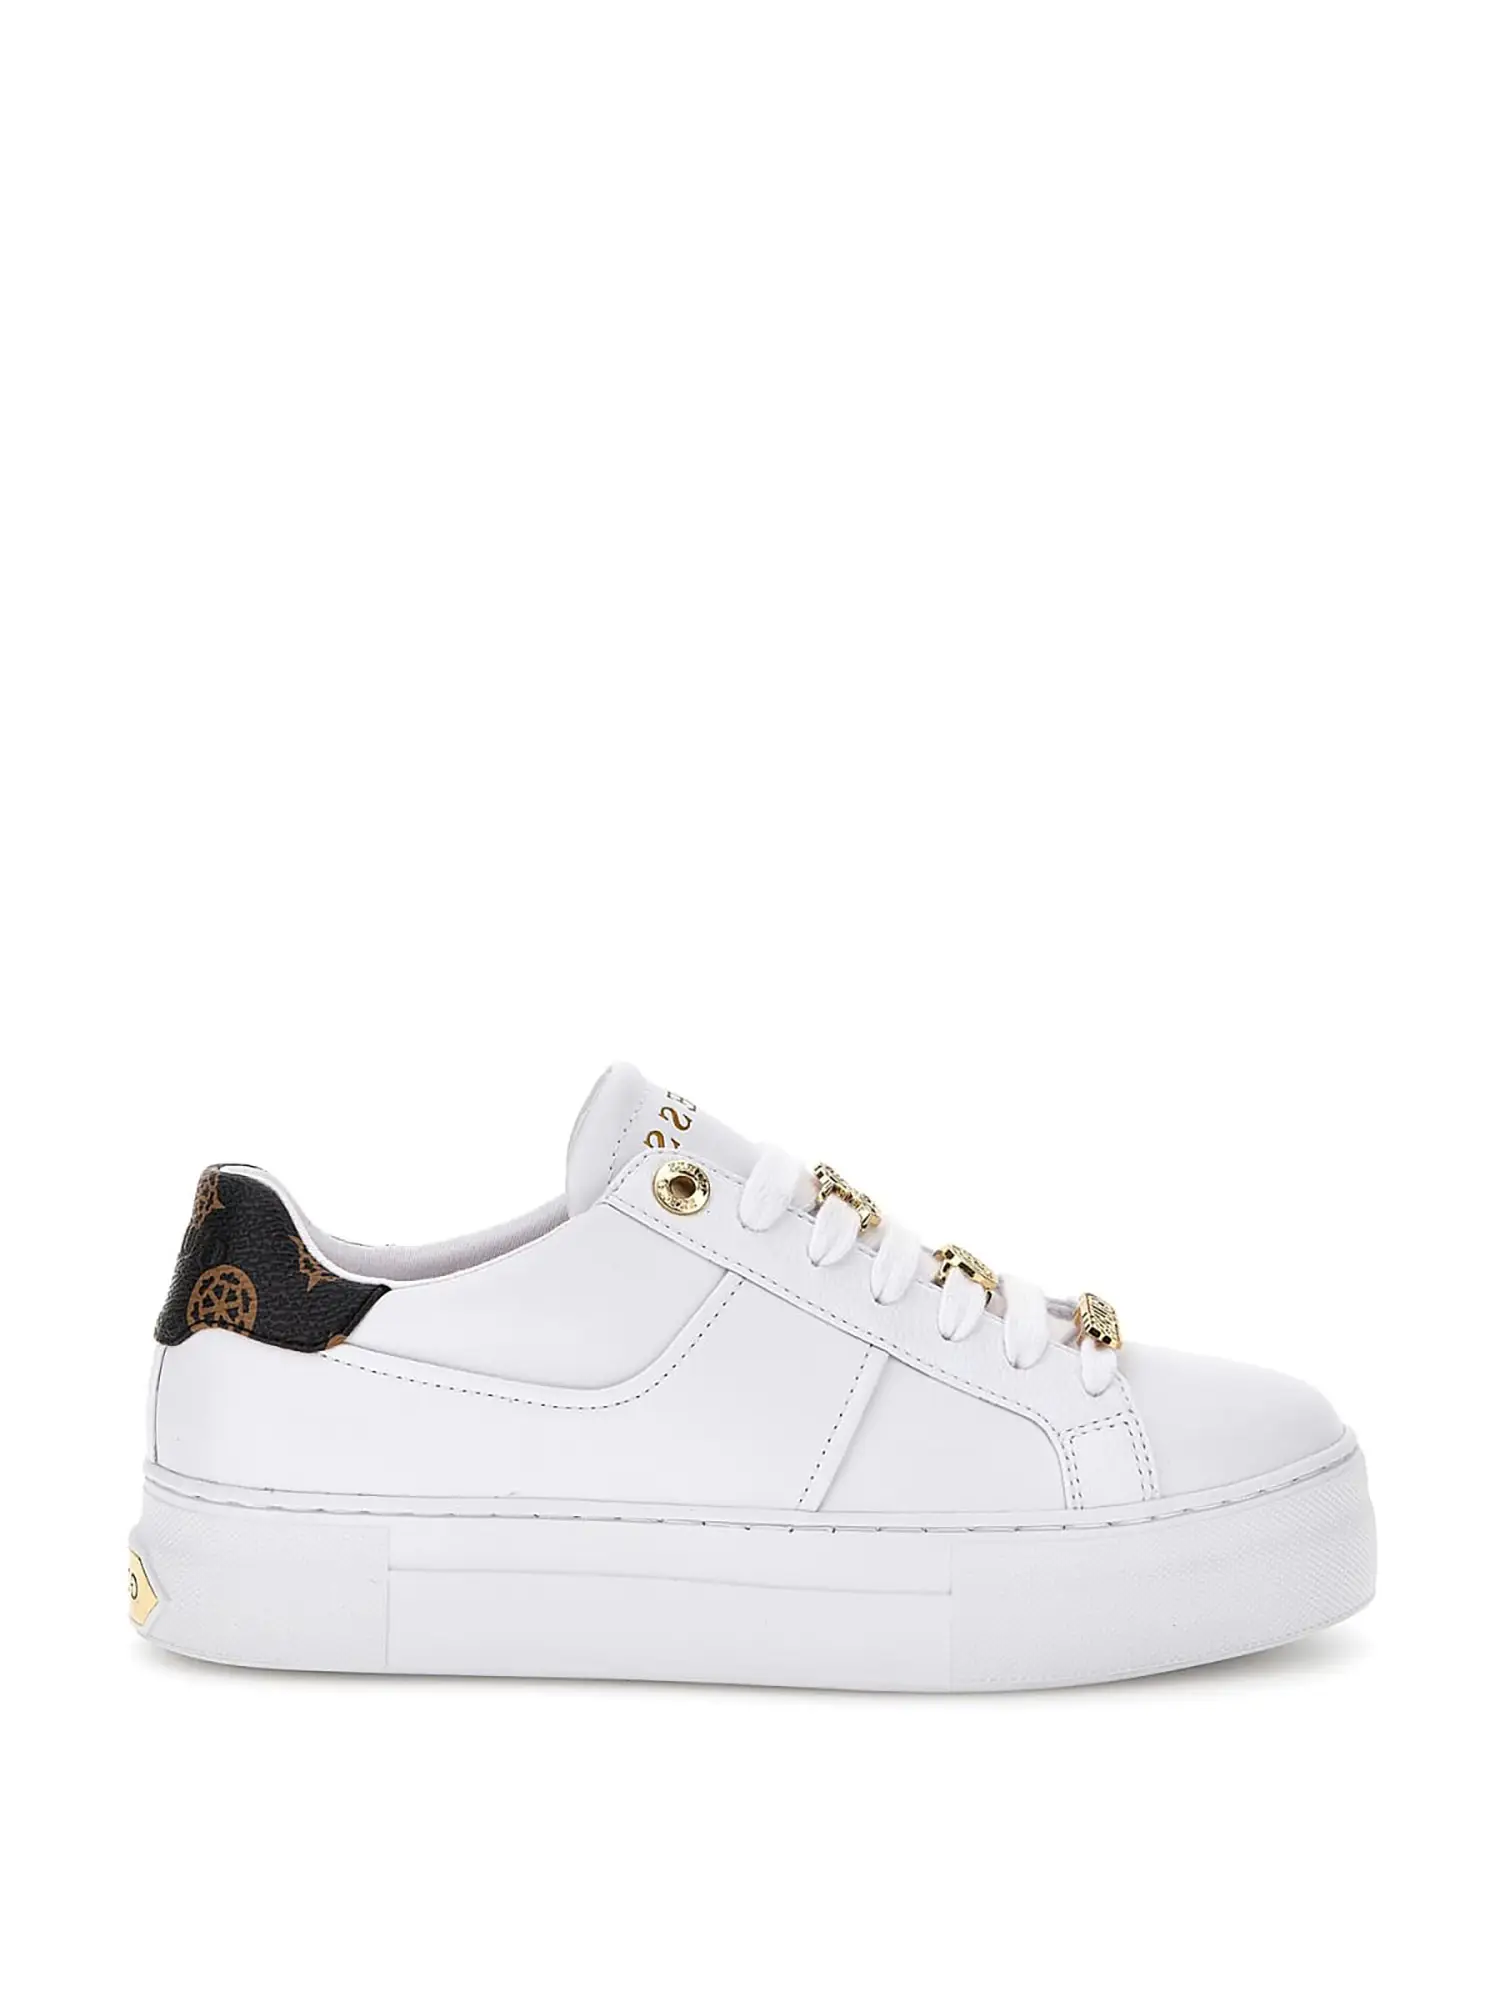 SNEAKERS DONNA - GUESS - FLJGIE ELE12 - BIANCO, 35